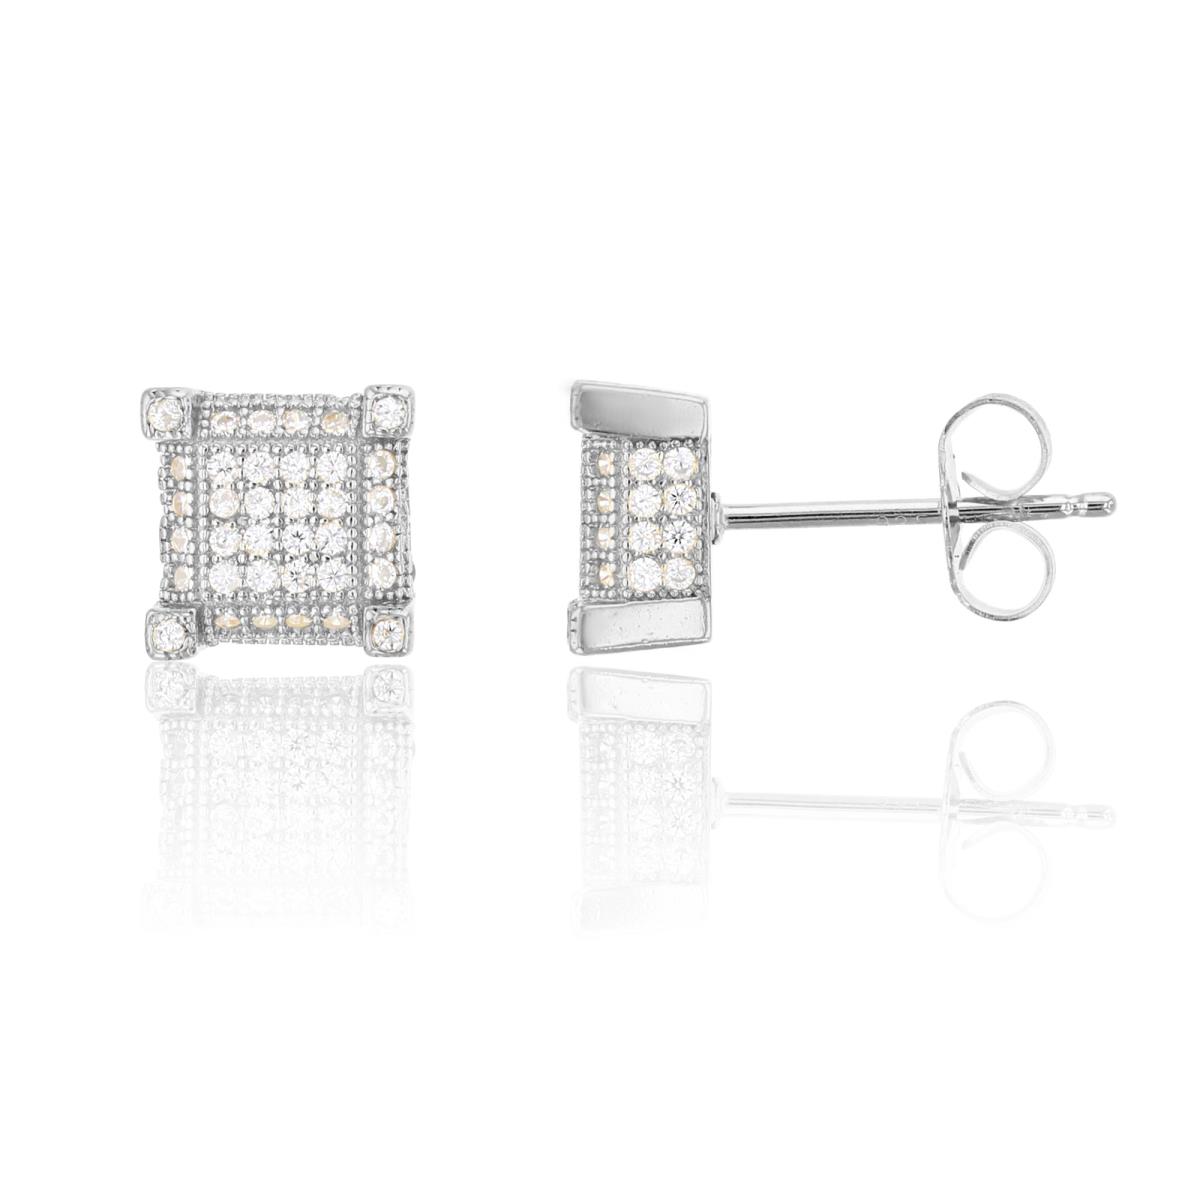 Sterling Silver 8x8mm 3D Square Micropave Stud Earring